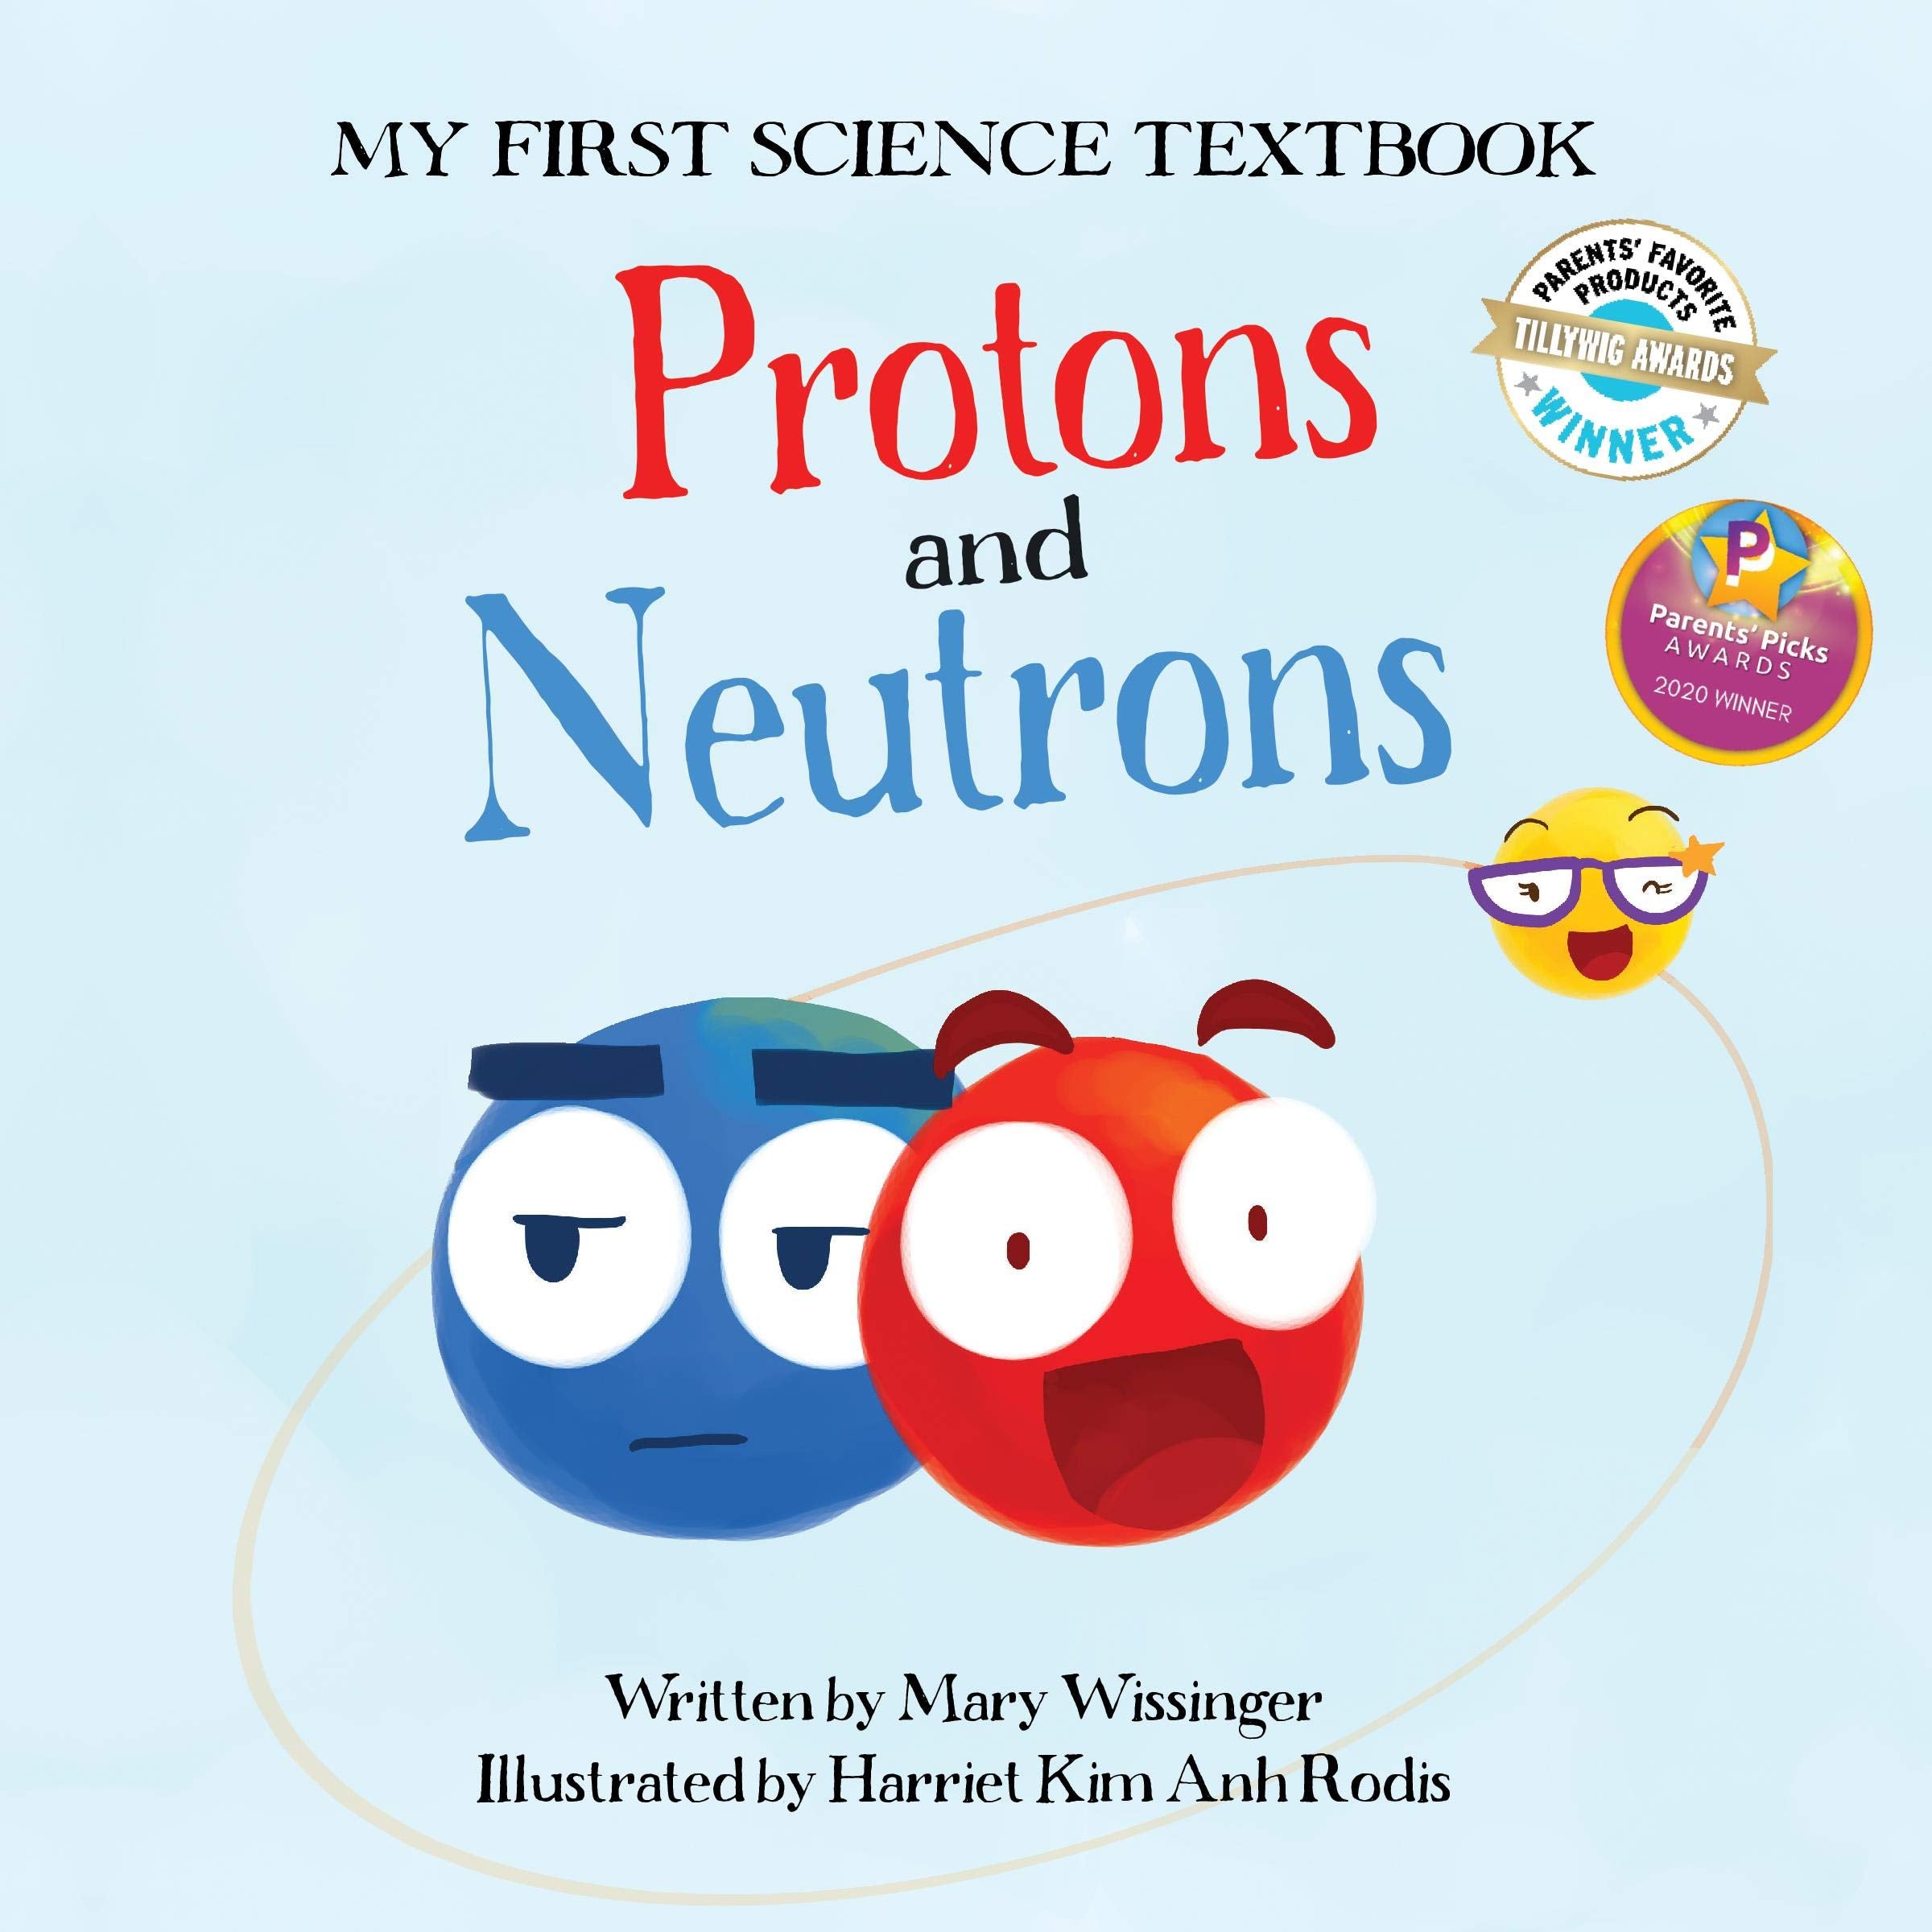 My First Science Textbook: Protons and Neutrons